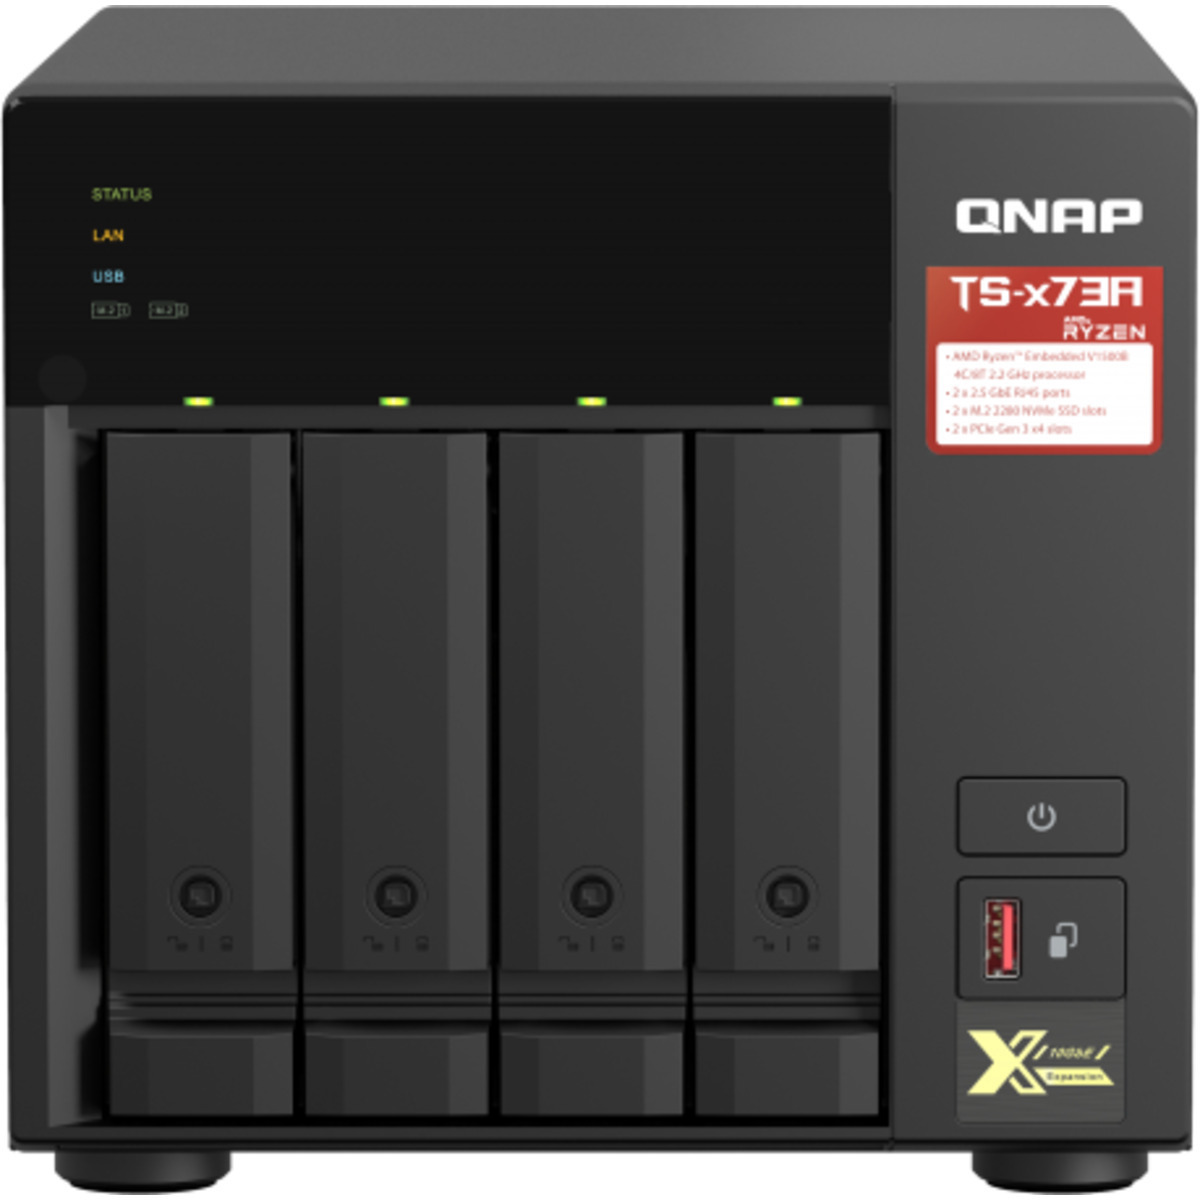 QNAP TS-473A 40tb 4-Bay Desktop Multimedia / Power User / Business NAS - Network Attached Storage Device 4x10tb Seagate IronWolf Pro ST10000NT001 3.5 7200rpm SATA 6Gb/s HDD NAS Class Drives Installed - Burn-In Tested - ON SALE TS-473A